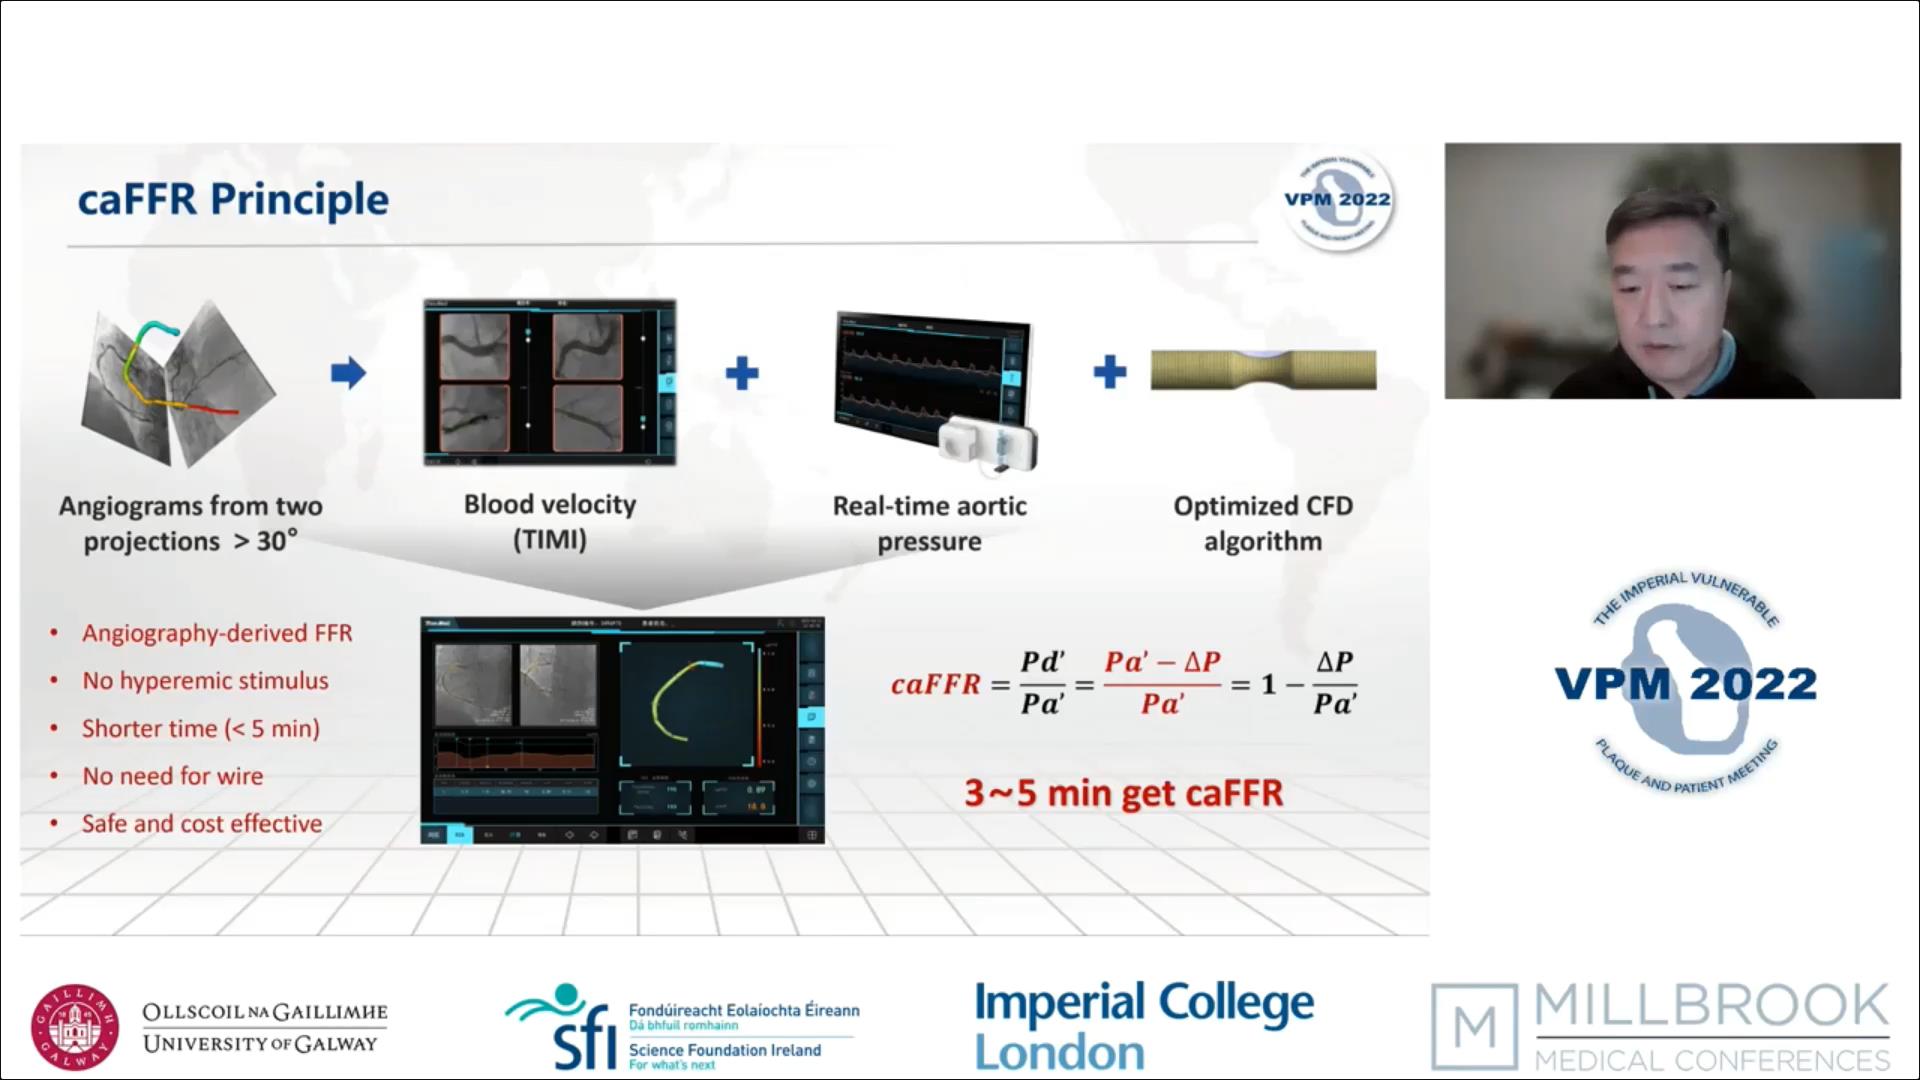 VPM 2022 | RainMed was Invited to Give a Presentation to Share caFFR and caIMR Product Technology at Key Opinion Leaders’ Meeting in the Cardiovascular Field